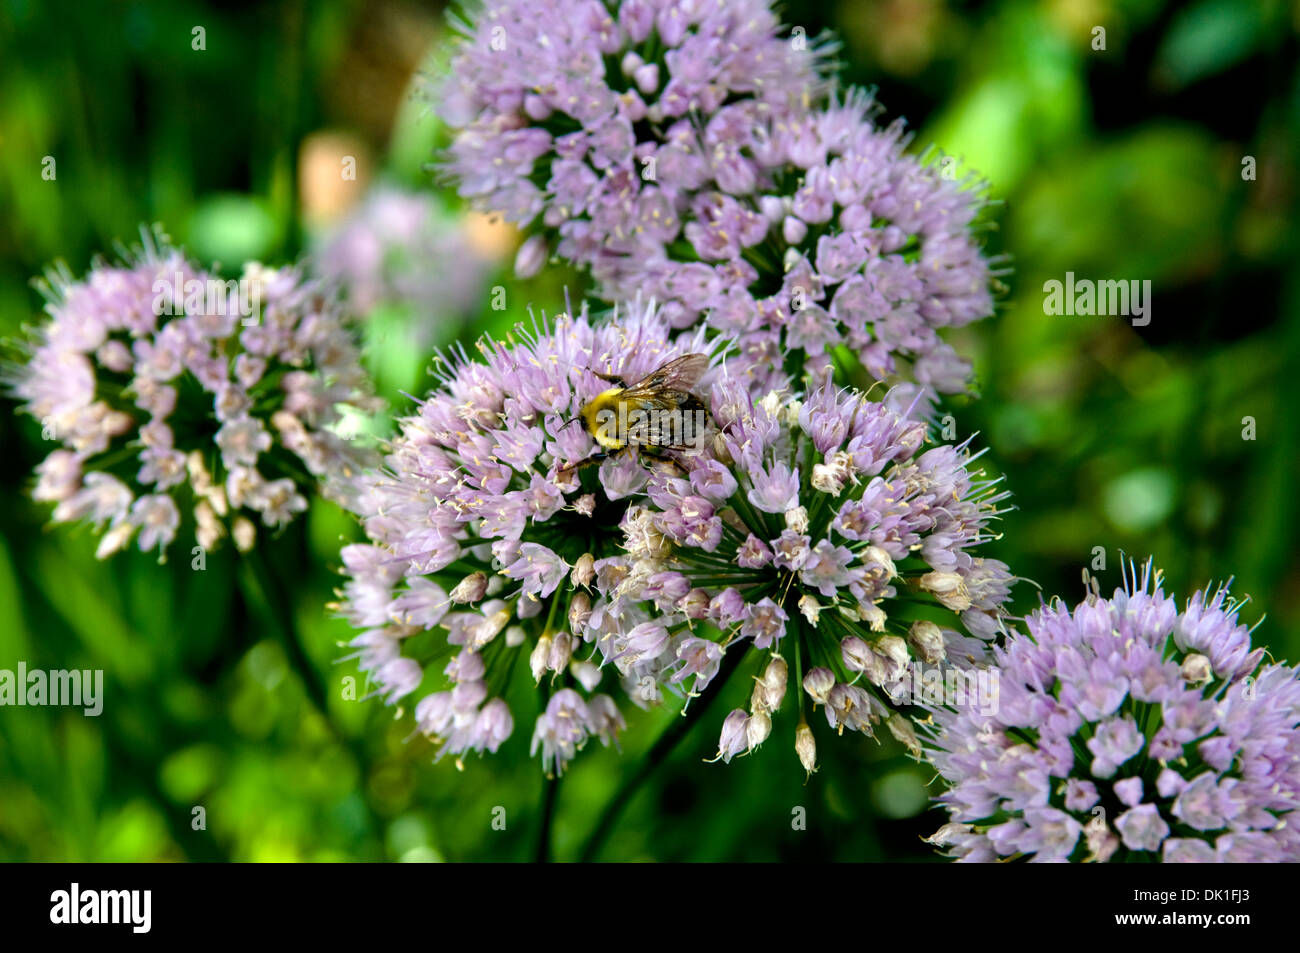 Allium flowers with bees upon them. Stock Photo